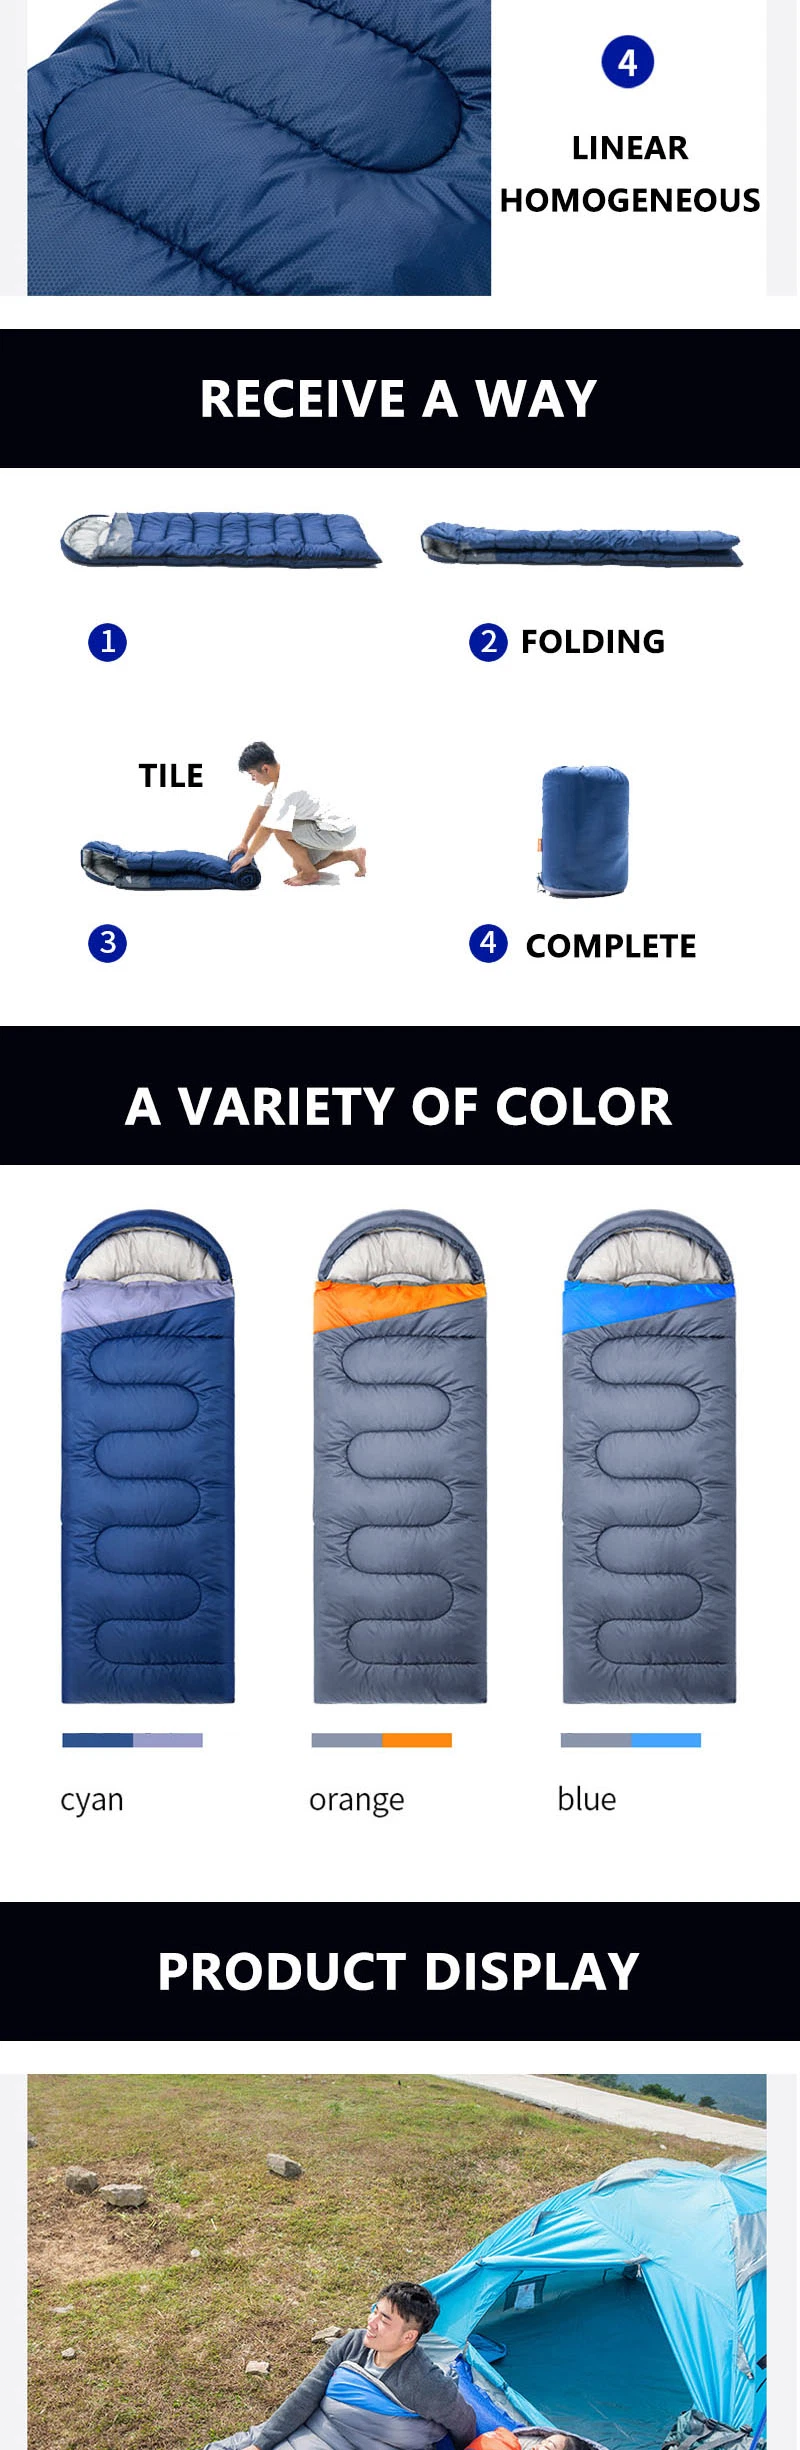 Hot Sales Envelope Sleeping Bag Portable Winter Outdoor Adults Compact Camping Double Hiking Sleeping Bag